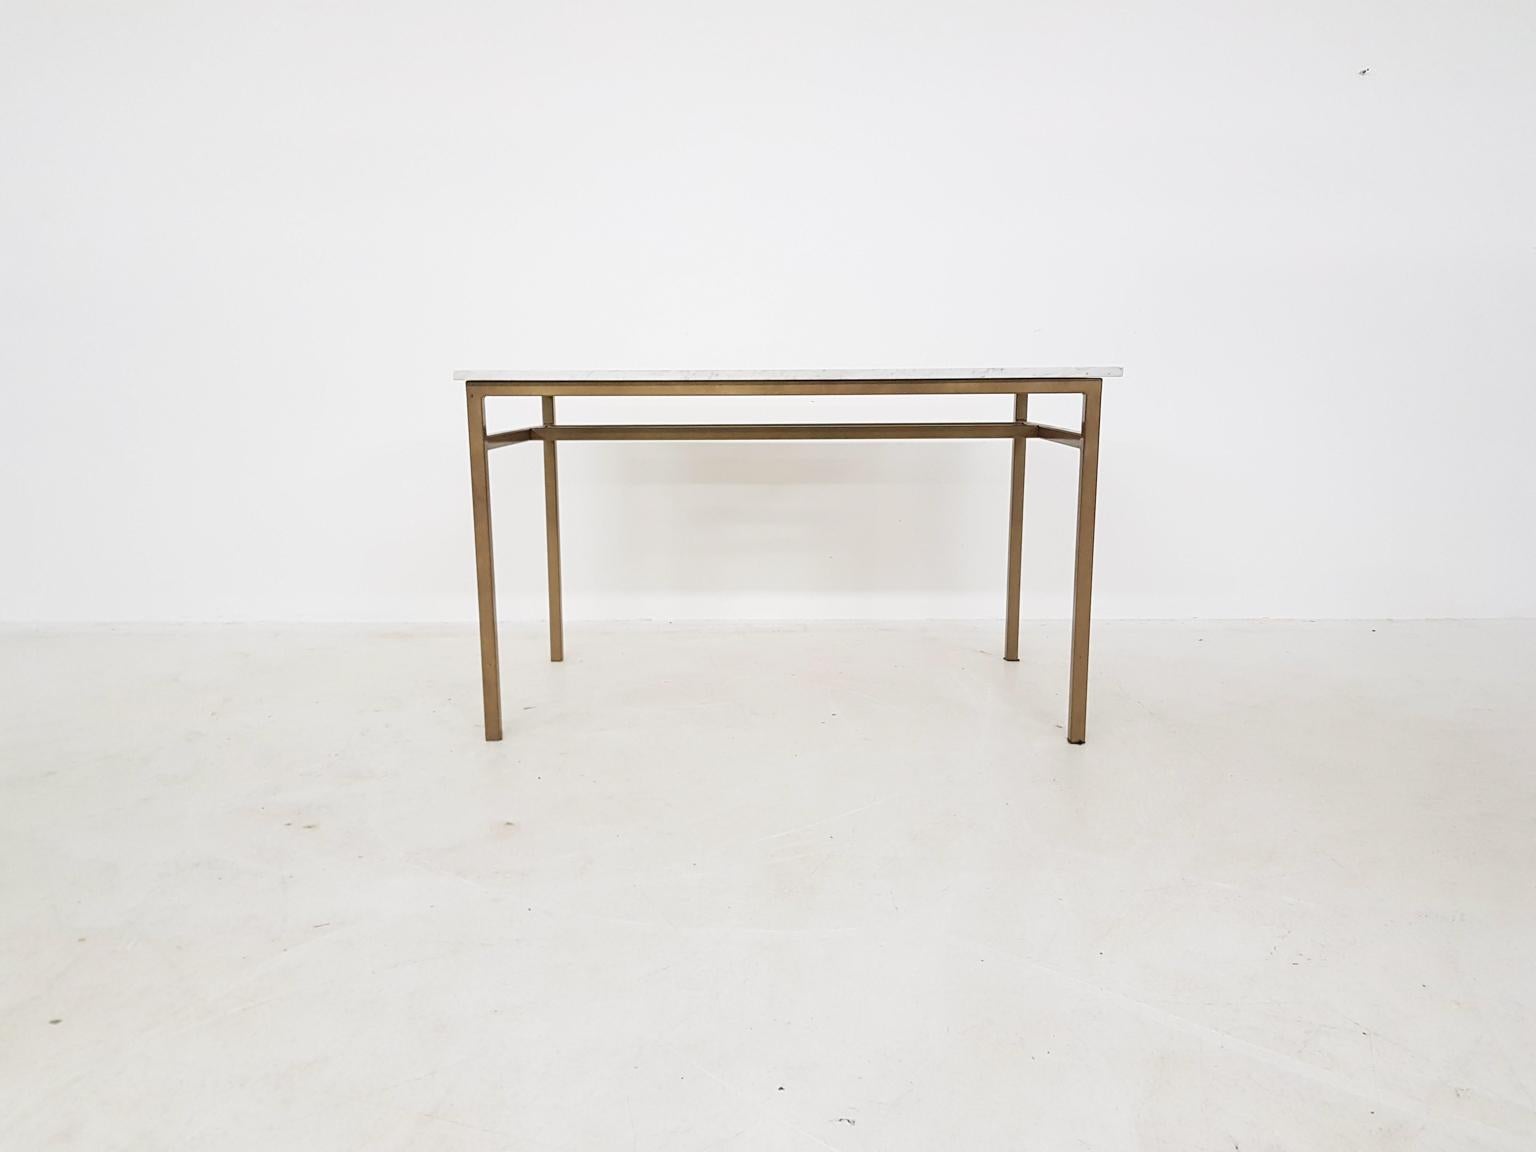 Heavy marble side table or desk. Made in the midcentury and probably from France or Italy.

The back has an extra metal bar, so it is best used as a desk or side table. 

The metal frame of the table is newly powder coated in bronze and in good